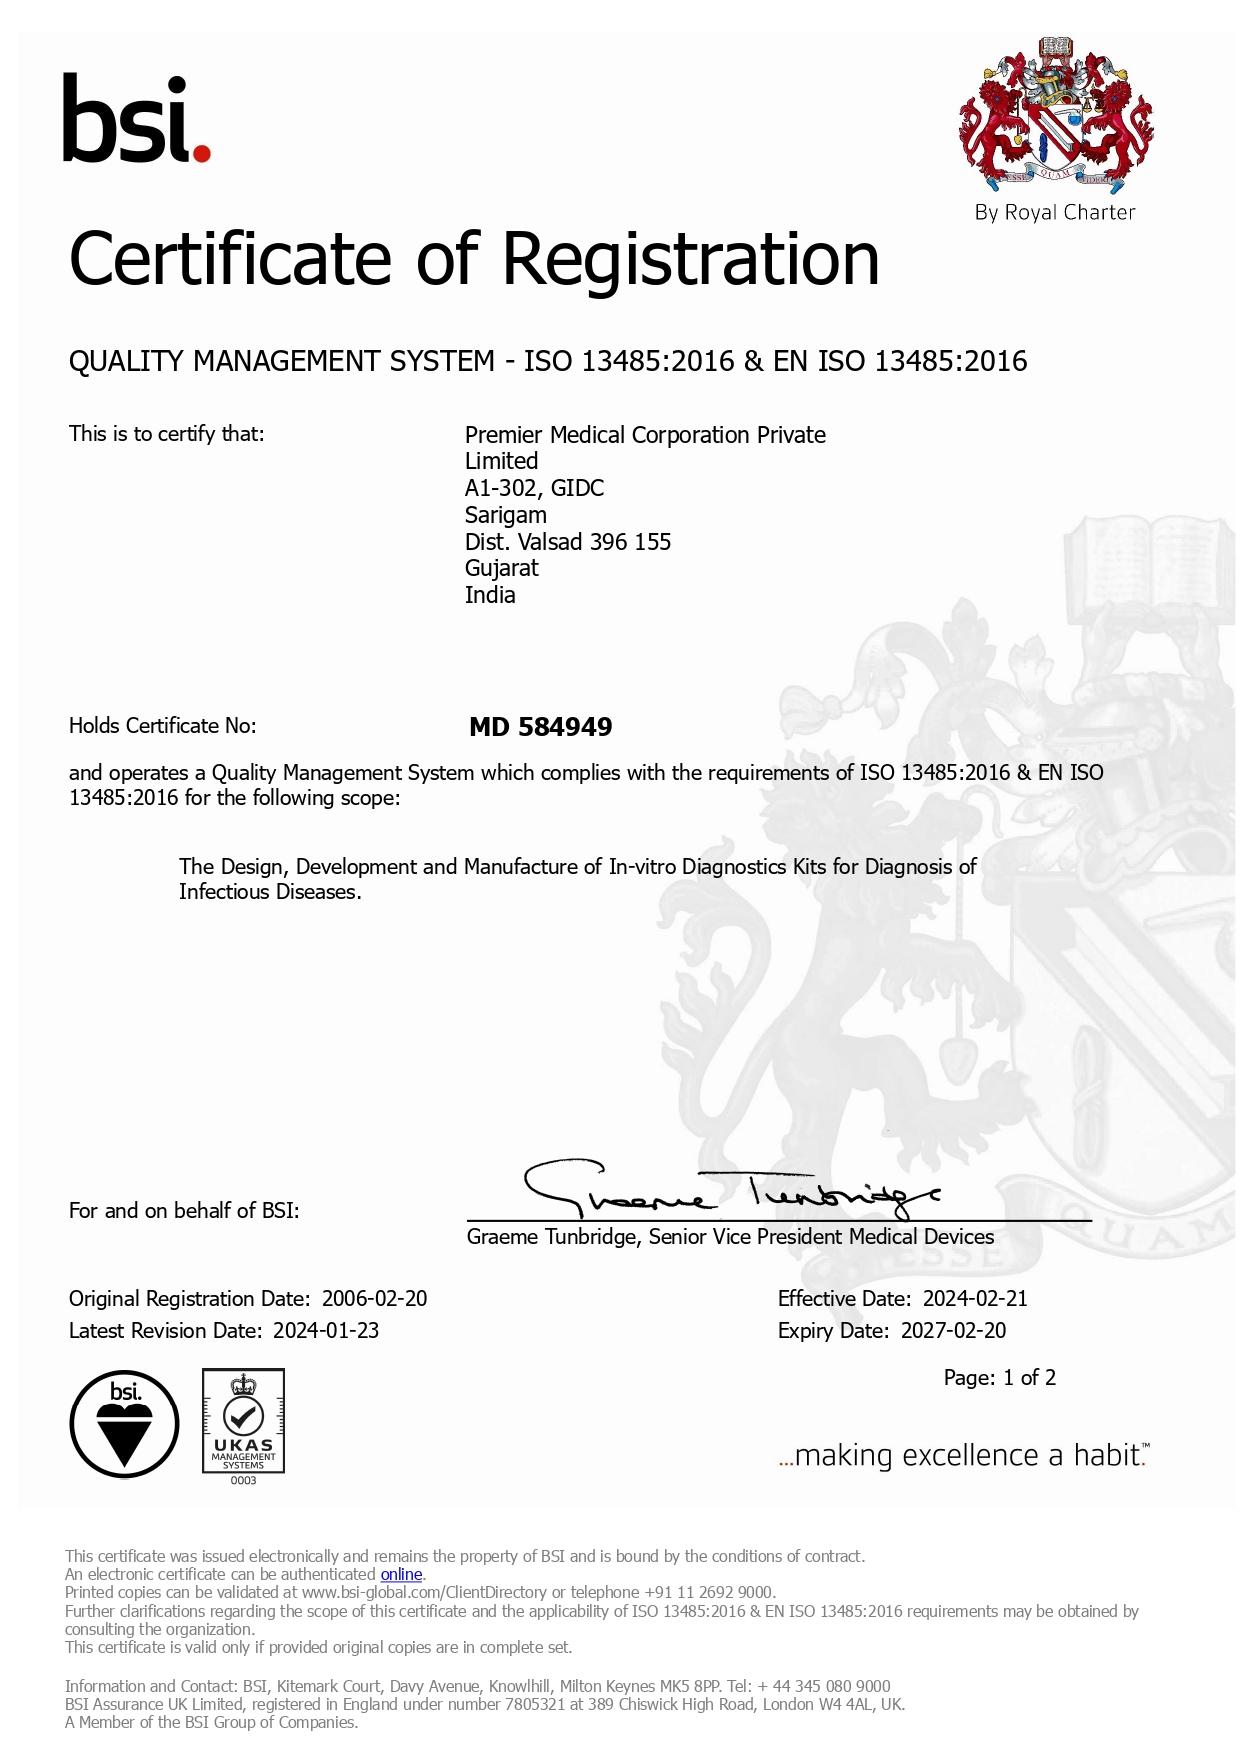 ISO 13485-2016 Certificate